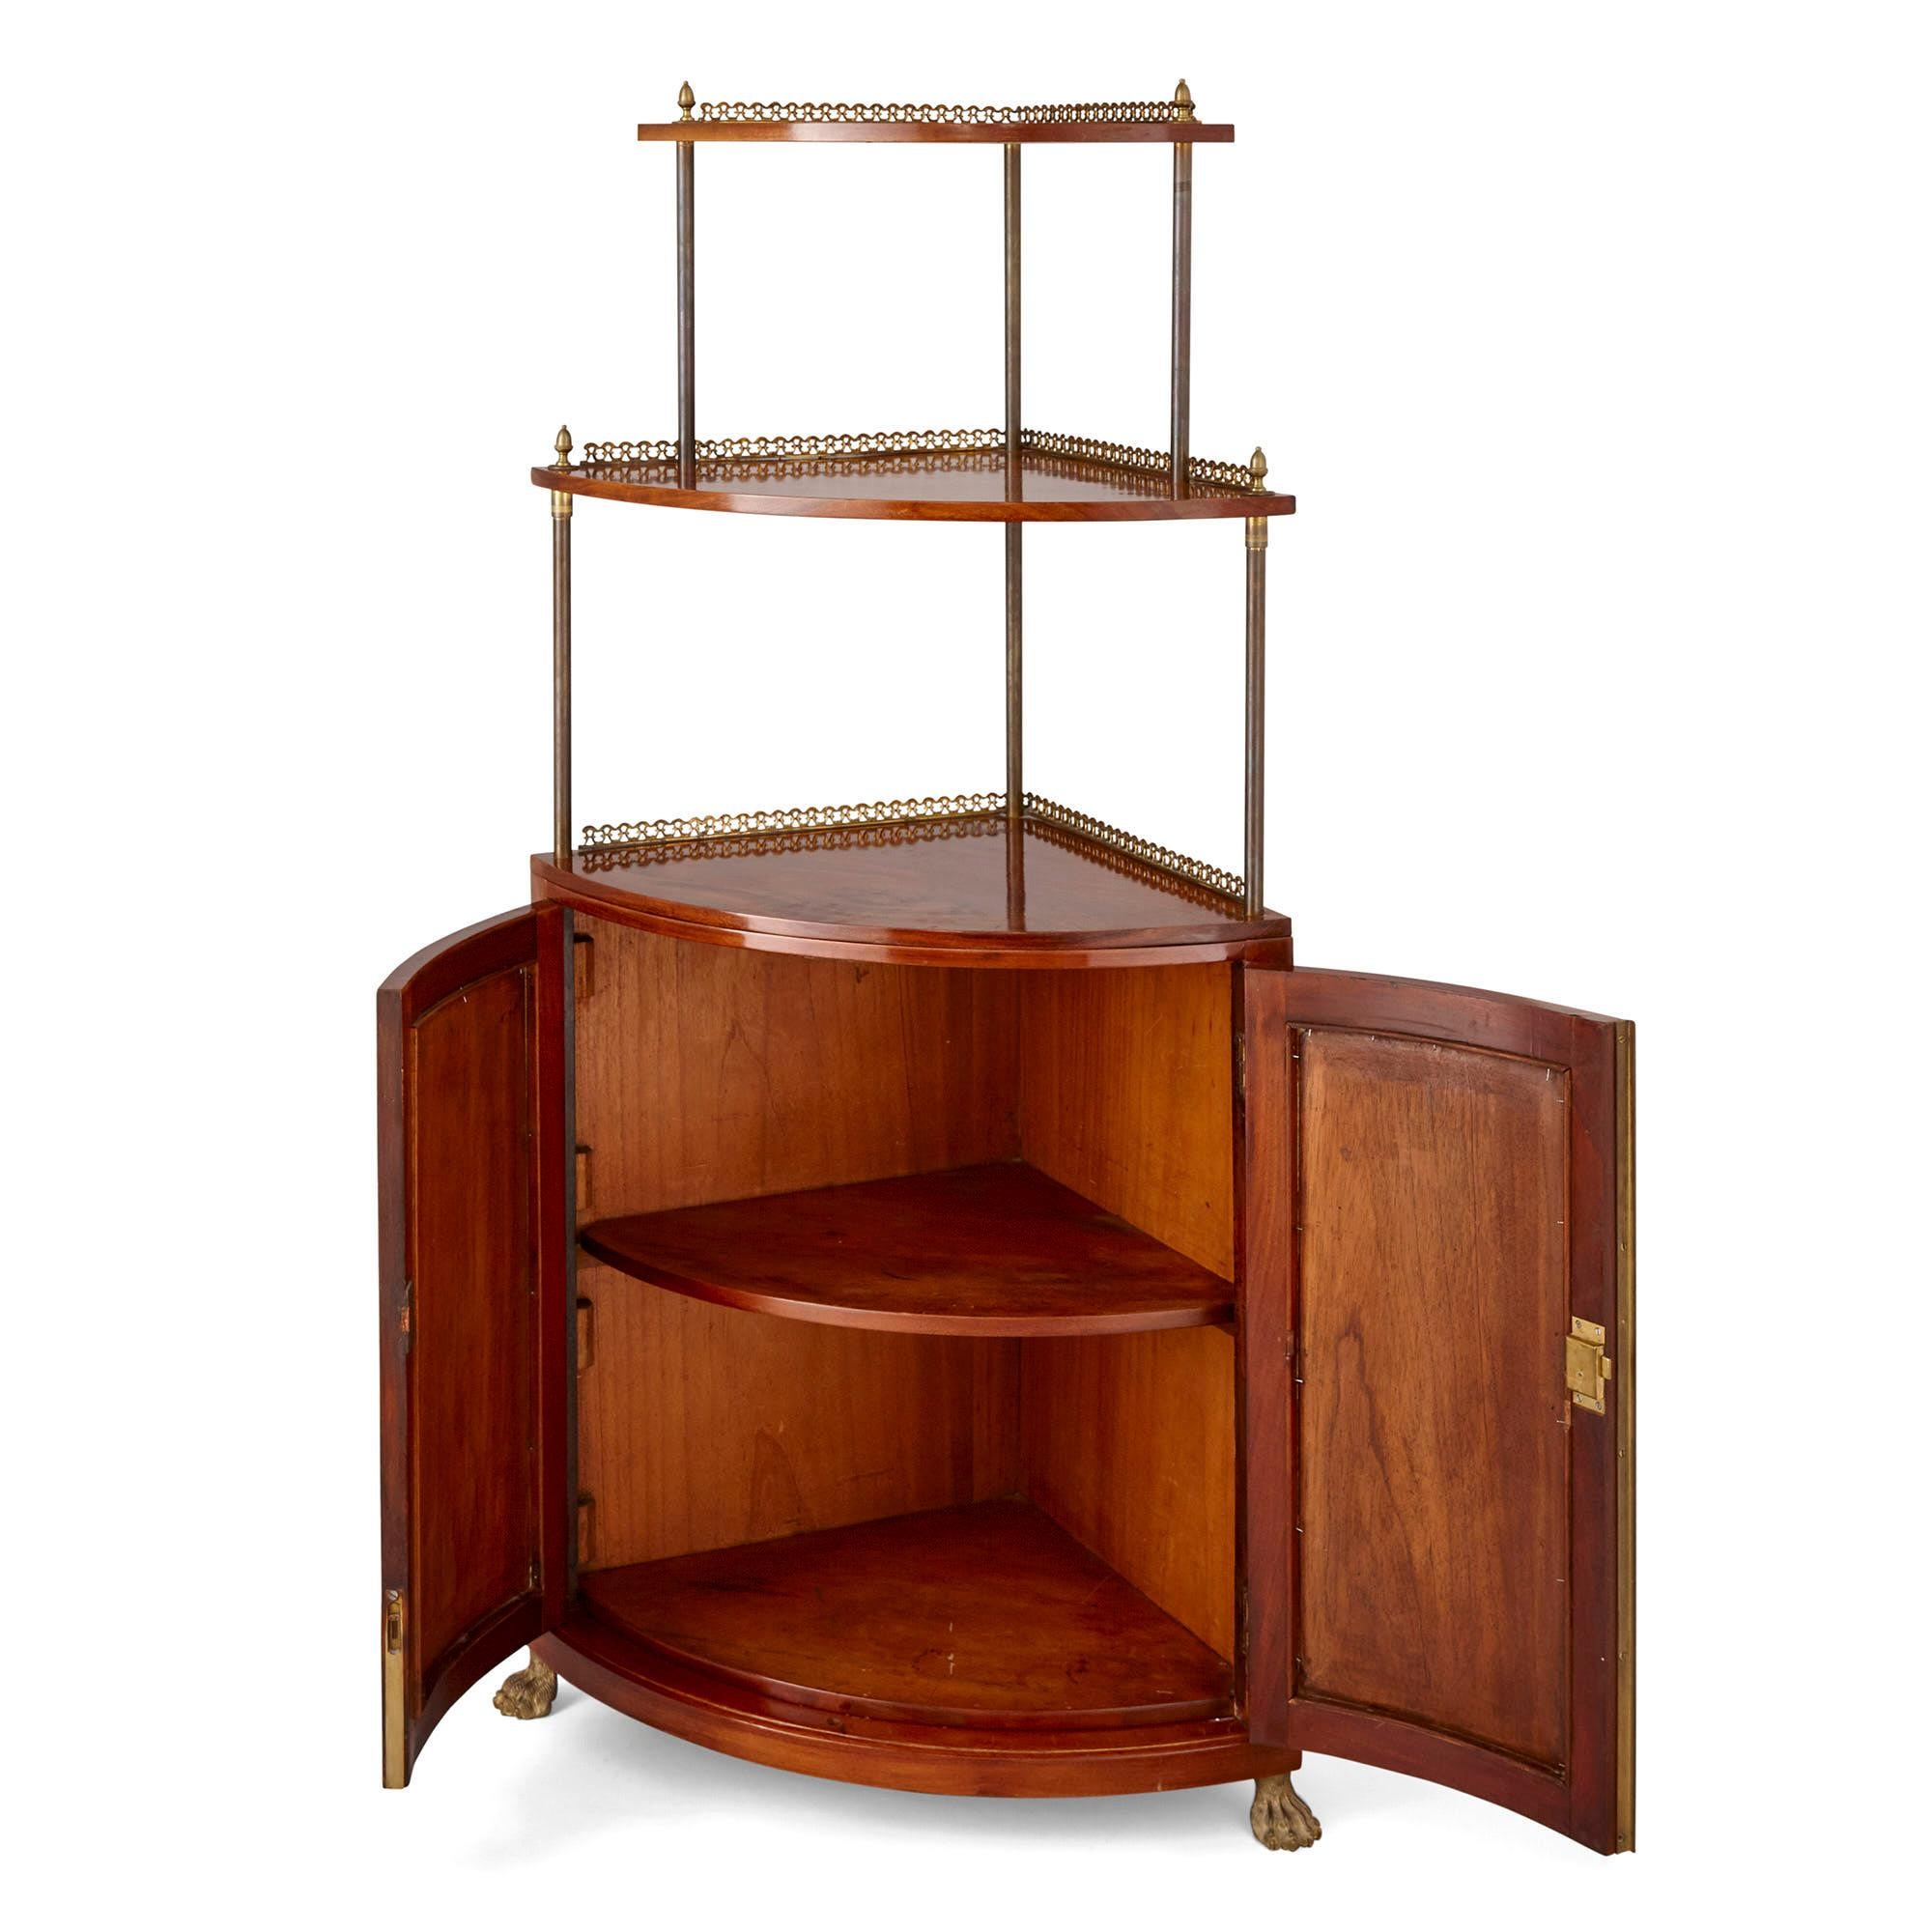 This corner unit, crafted from mahogany and gilt bronze, functions as a cabinet and a tiered shelf. The cabinet, quarter-circle shaped in profile, is supported by paw feet and features, to the front, twin curvilinear doors. The doors, which open to